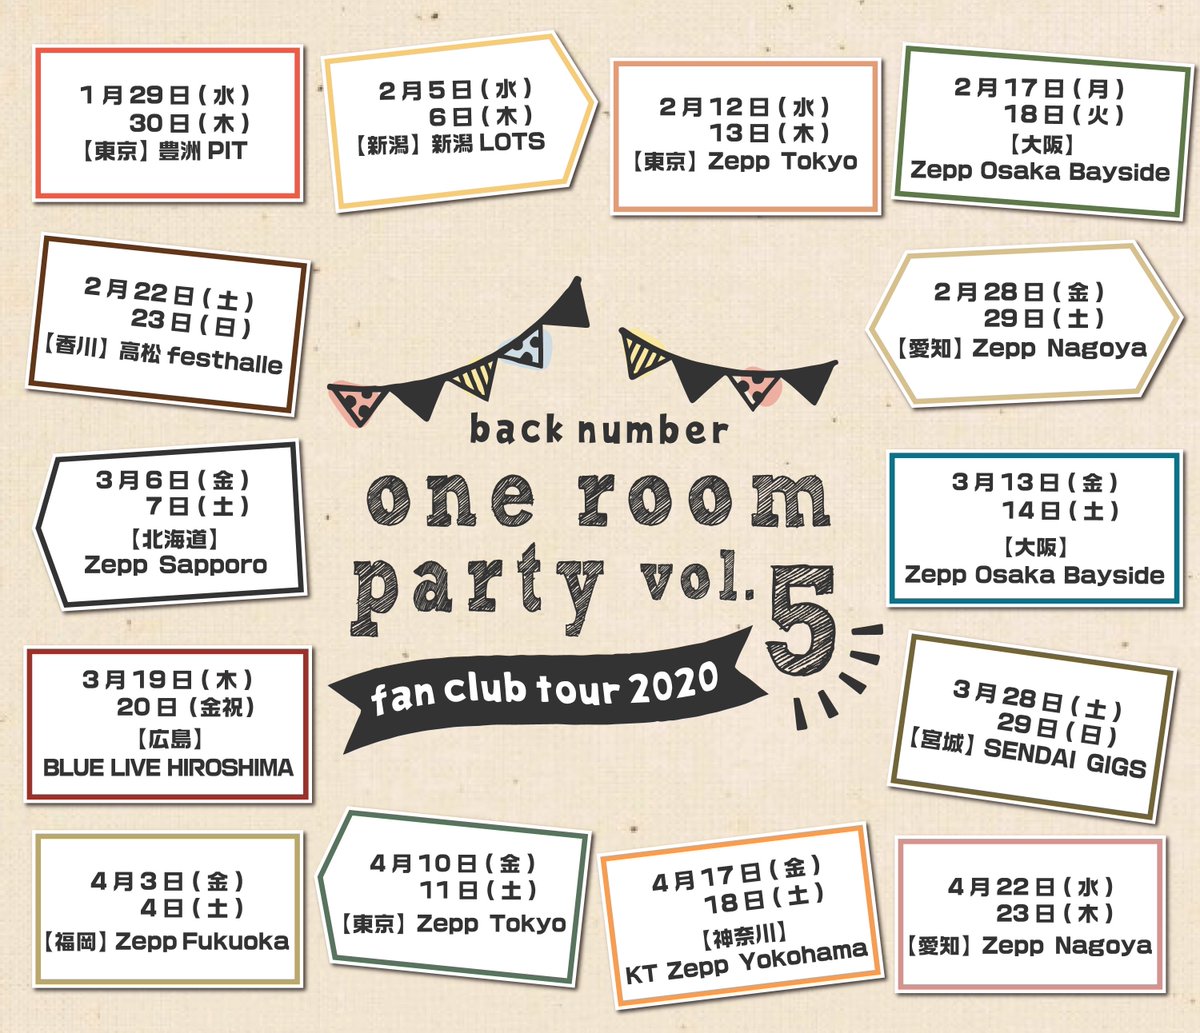 Back Number Staff On Twitter Back Numberファンクラブツアー2020 One Room Party Vol 5 開催決定 One Room Gold Key 会員様限定のライブイベントです 一般受付及びone Room Silver Key の受付はございません またgold Key会員様も抽選制となりますのでご